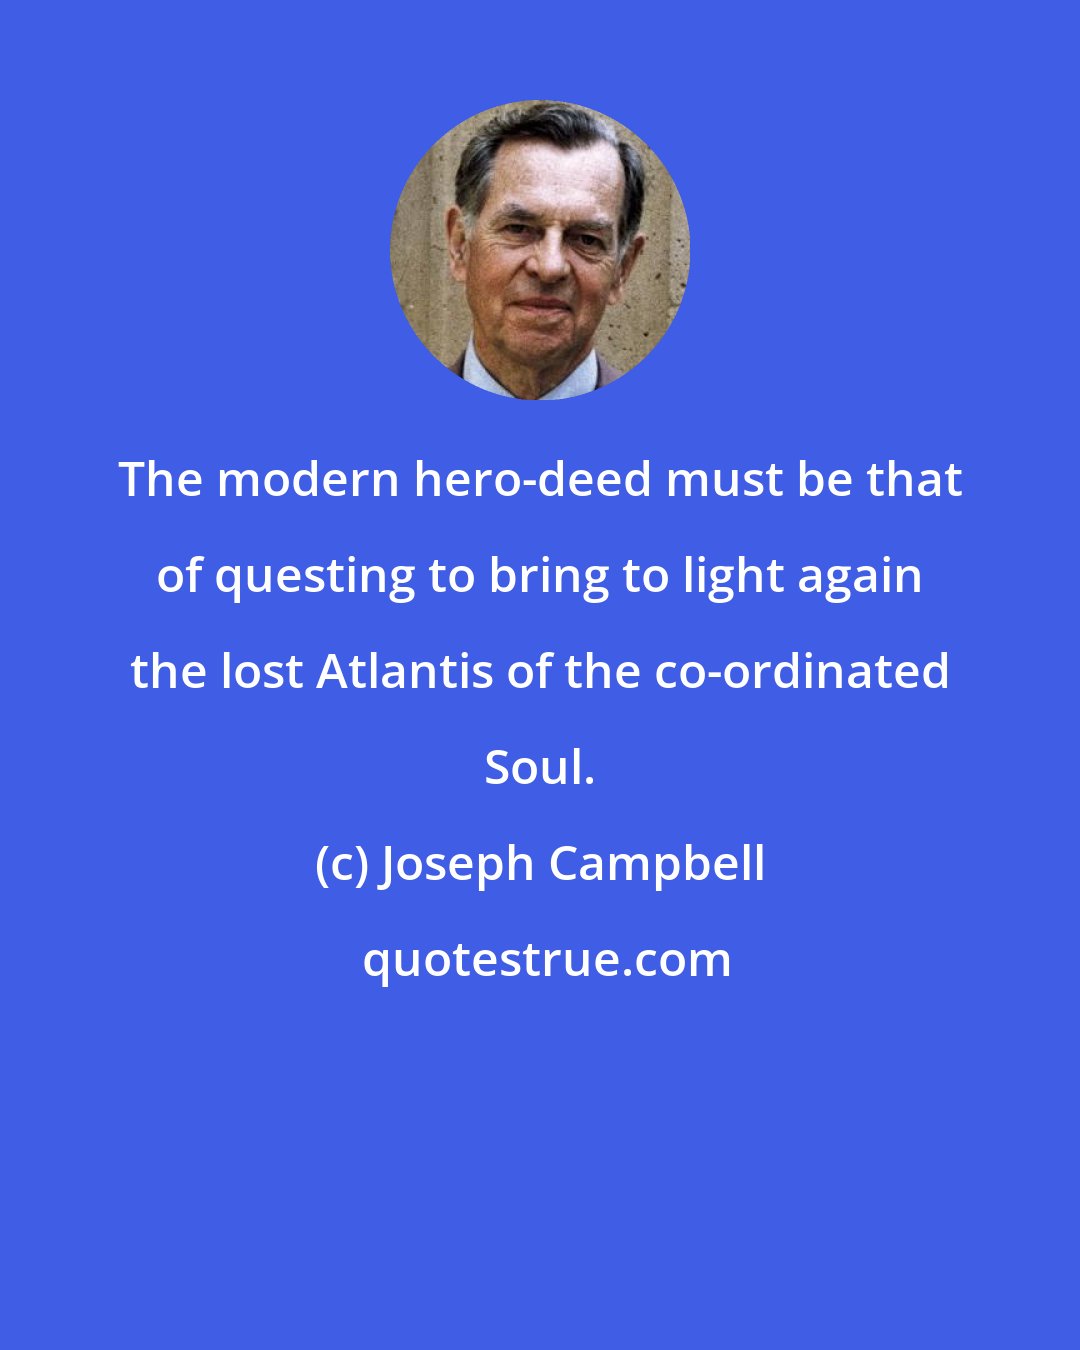 Joseph Campbell: The modern hero-deed must be that of questing to bring to light again the lost Atlantis of the co-ordinated Soul.